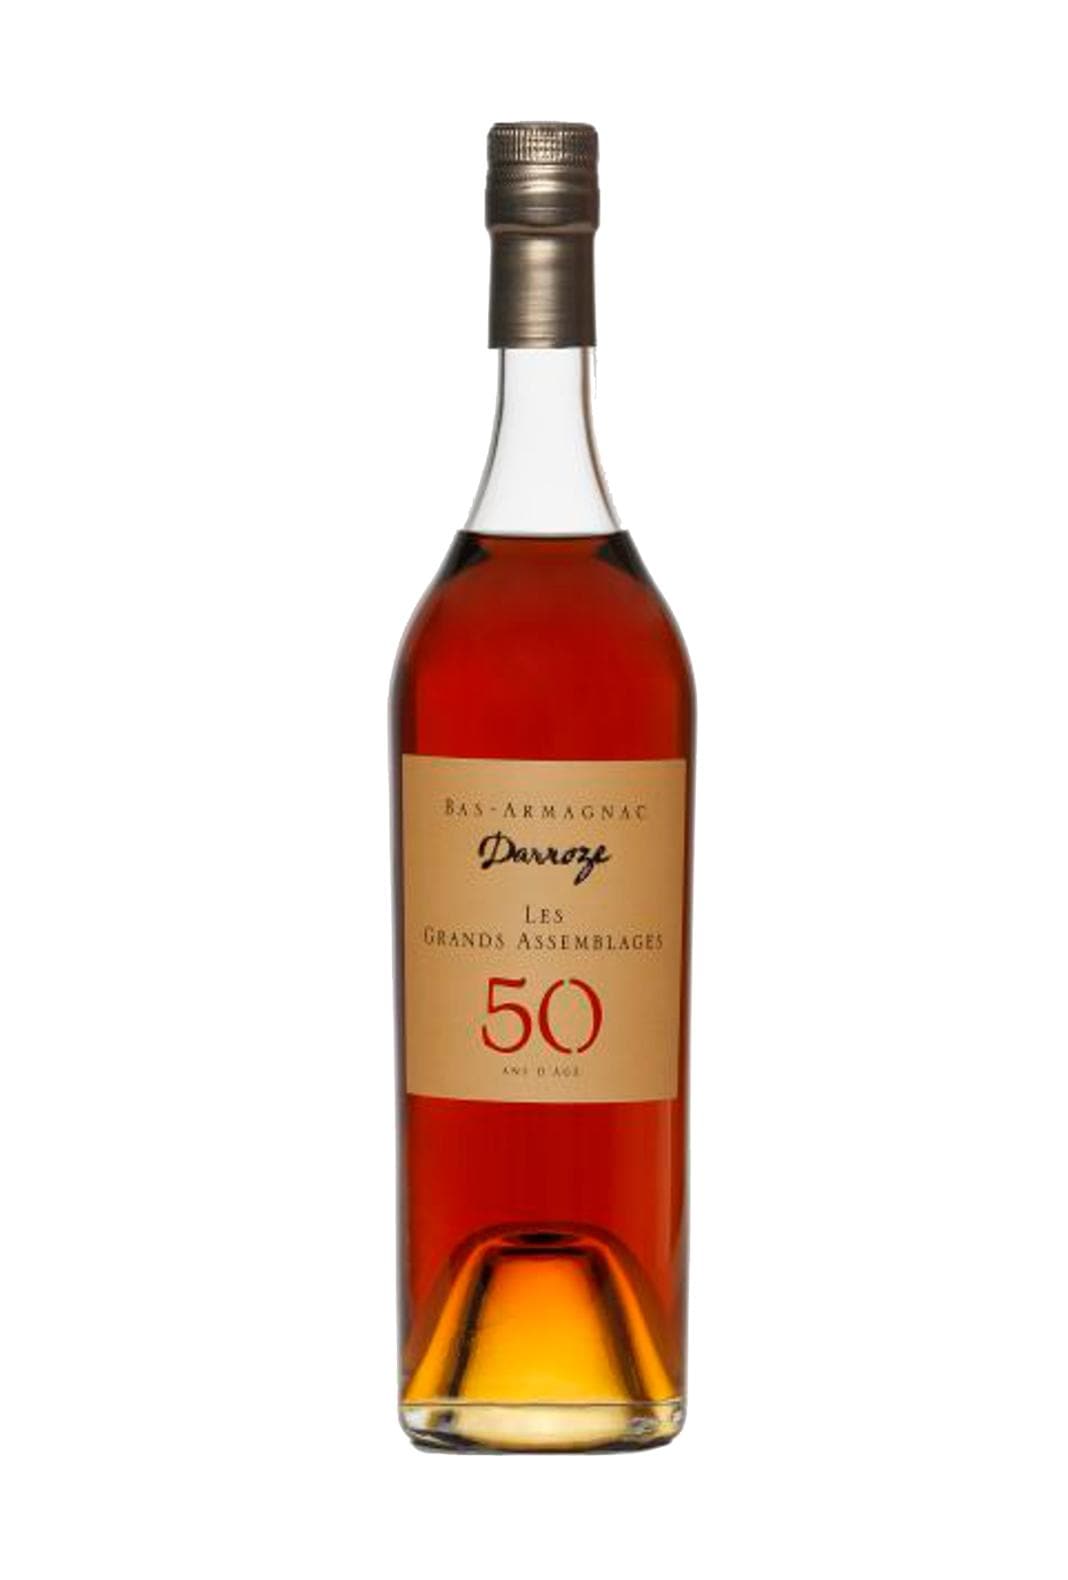 Darroze Grand Bas Armagnac Les Grands Assemblages 50 years 42% 700ml | Brandy | Shop online at Spirits of France